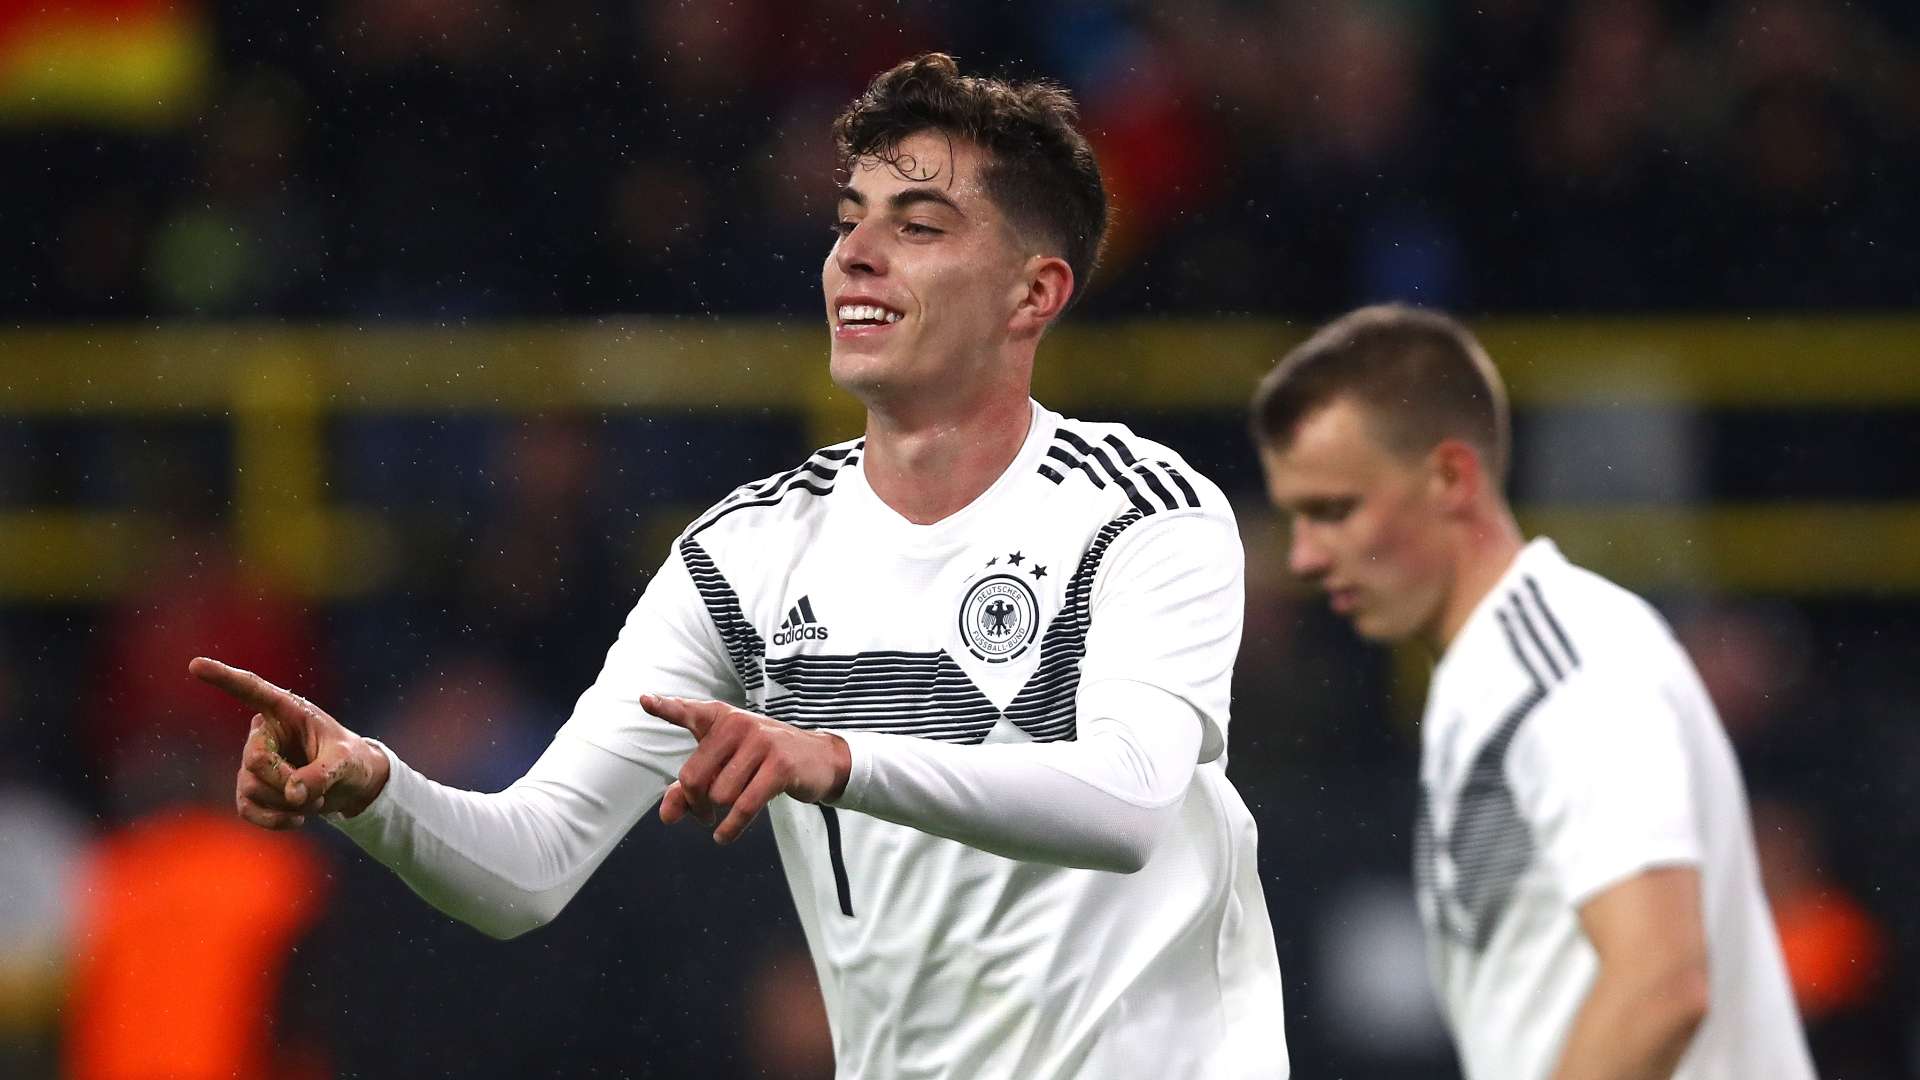 Havertz is a player for Real Madrid' Leverkusen star perfect for La Liga, says DFB chief Bierhoff